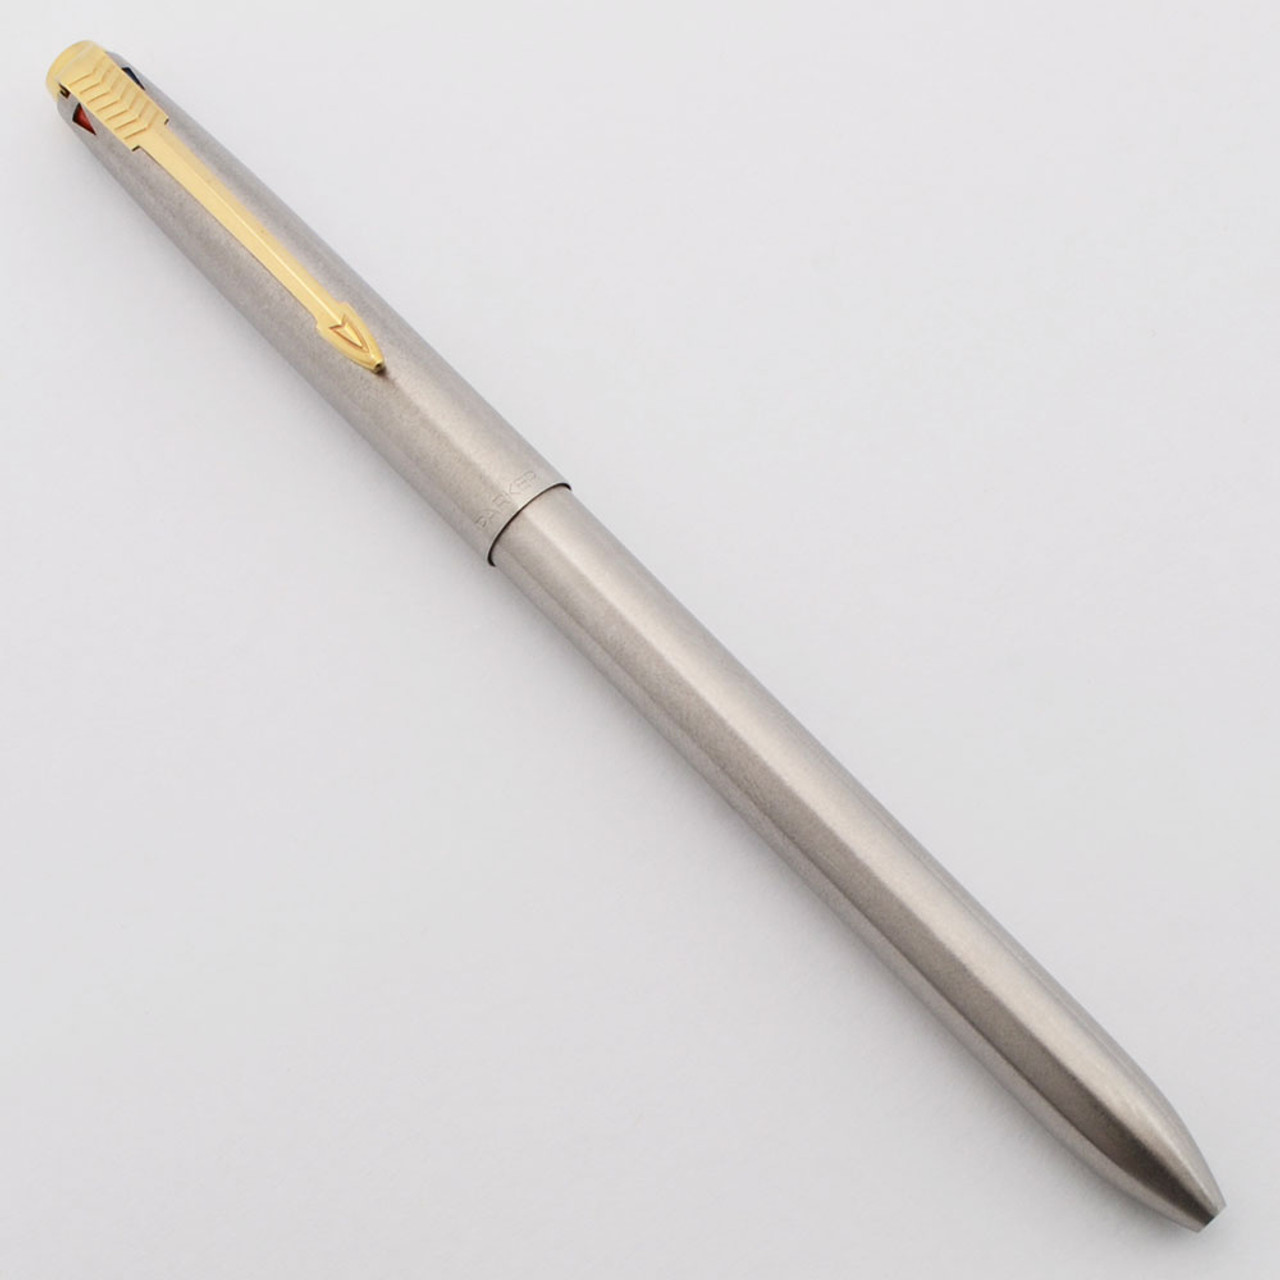 Parker 45 Flighter Multi-Pen - Four-Color Ballpoint,  Brushed Steel Finish, Gold-Plated Clip (Excellent, Works Well)